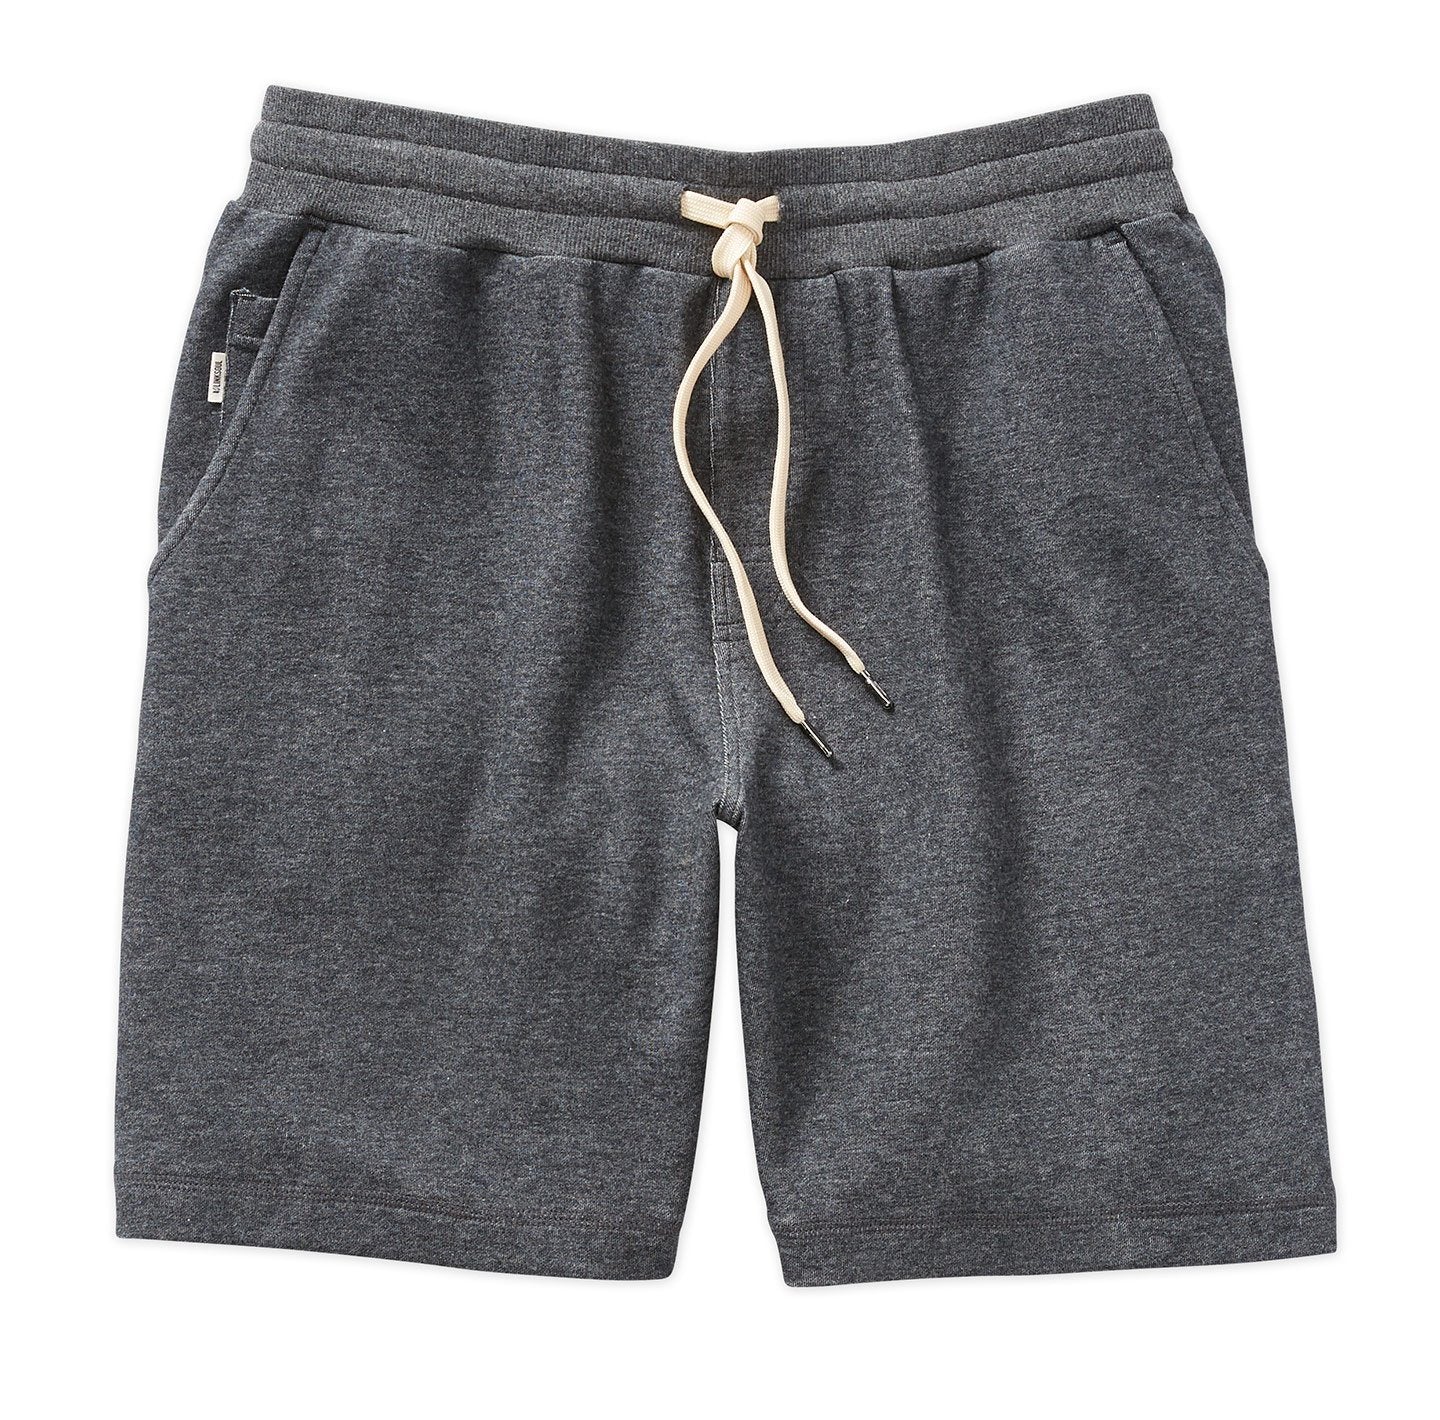 Men's sweat shorts, when it comes to men's sport shorts, there are many different styles, materials, and features to consider.